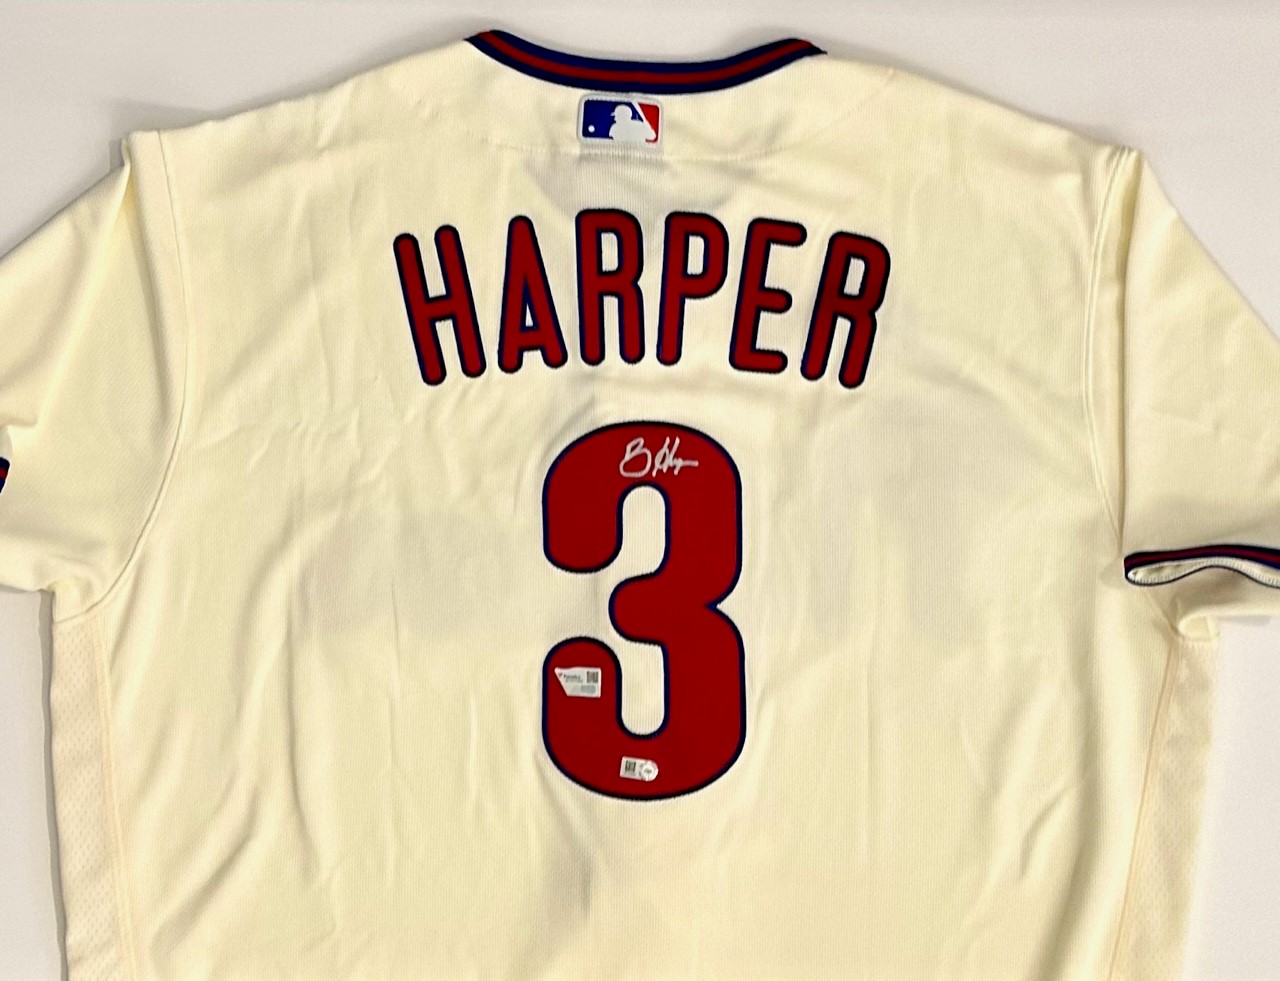 Bryce Harper Autographed Authentic Phillies Jersey